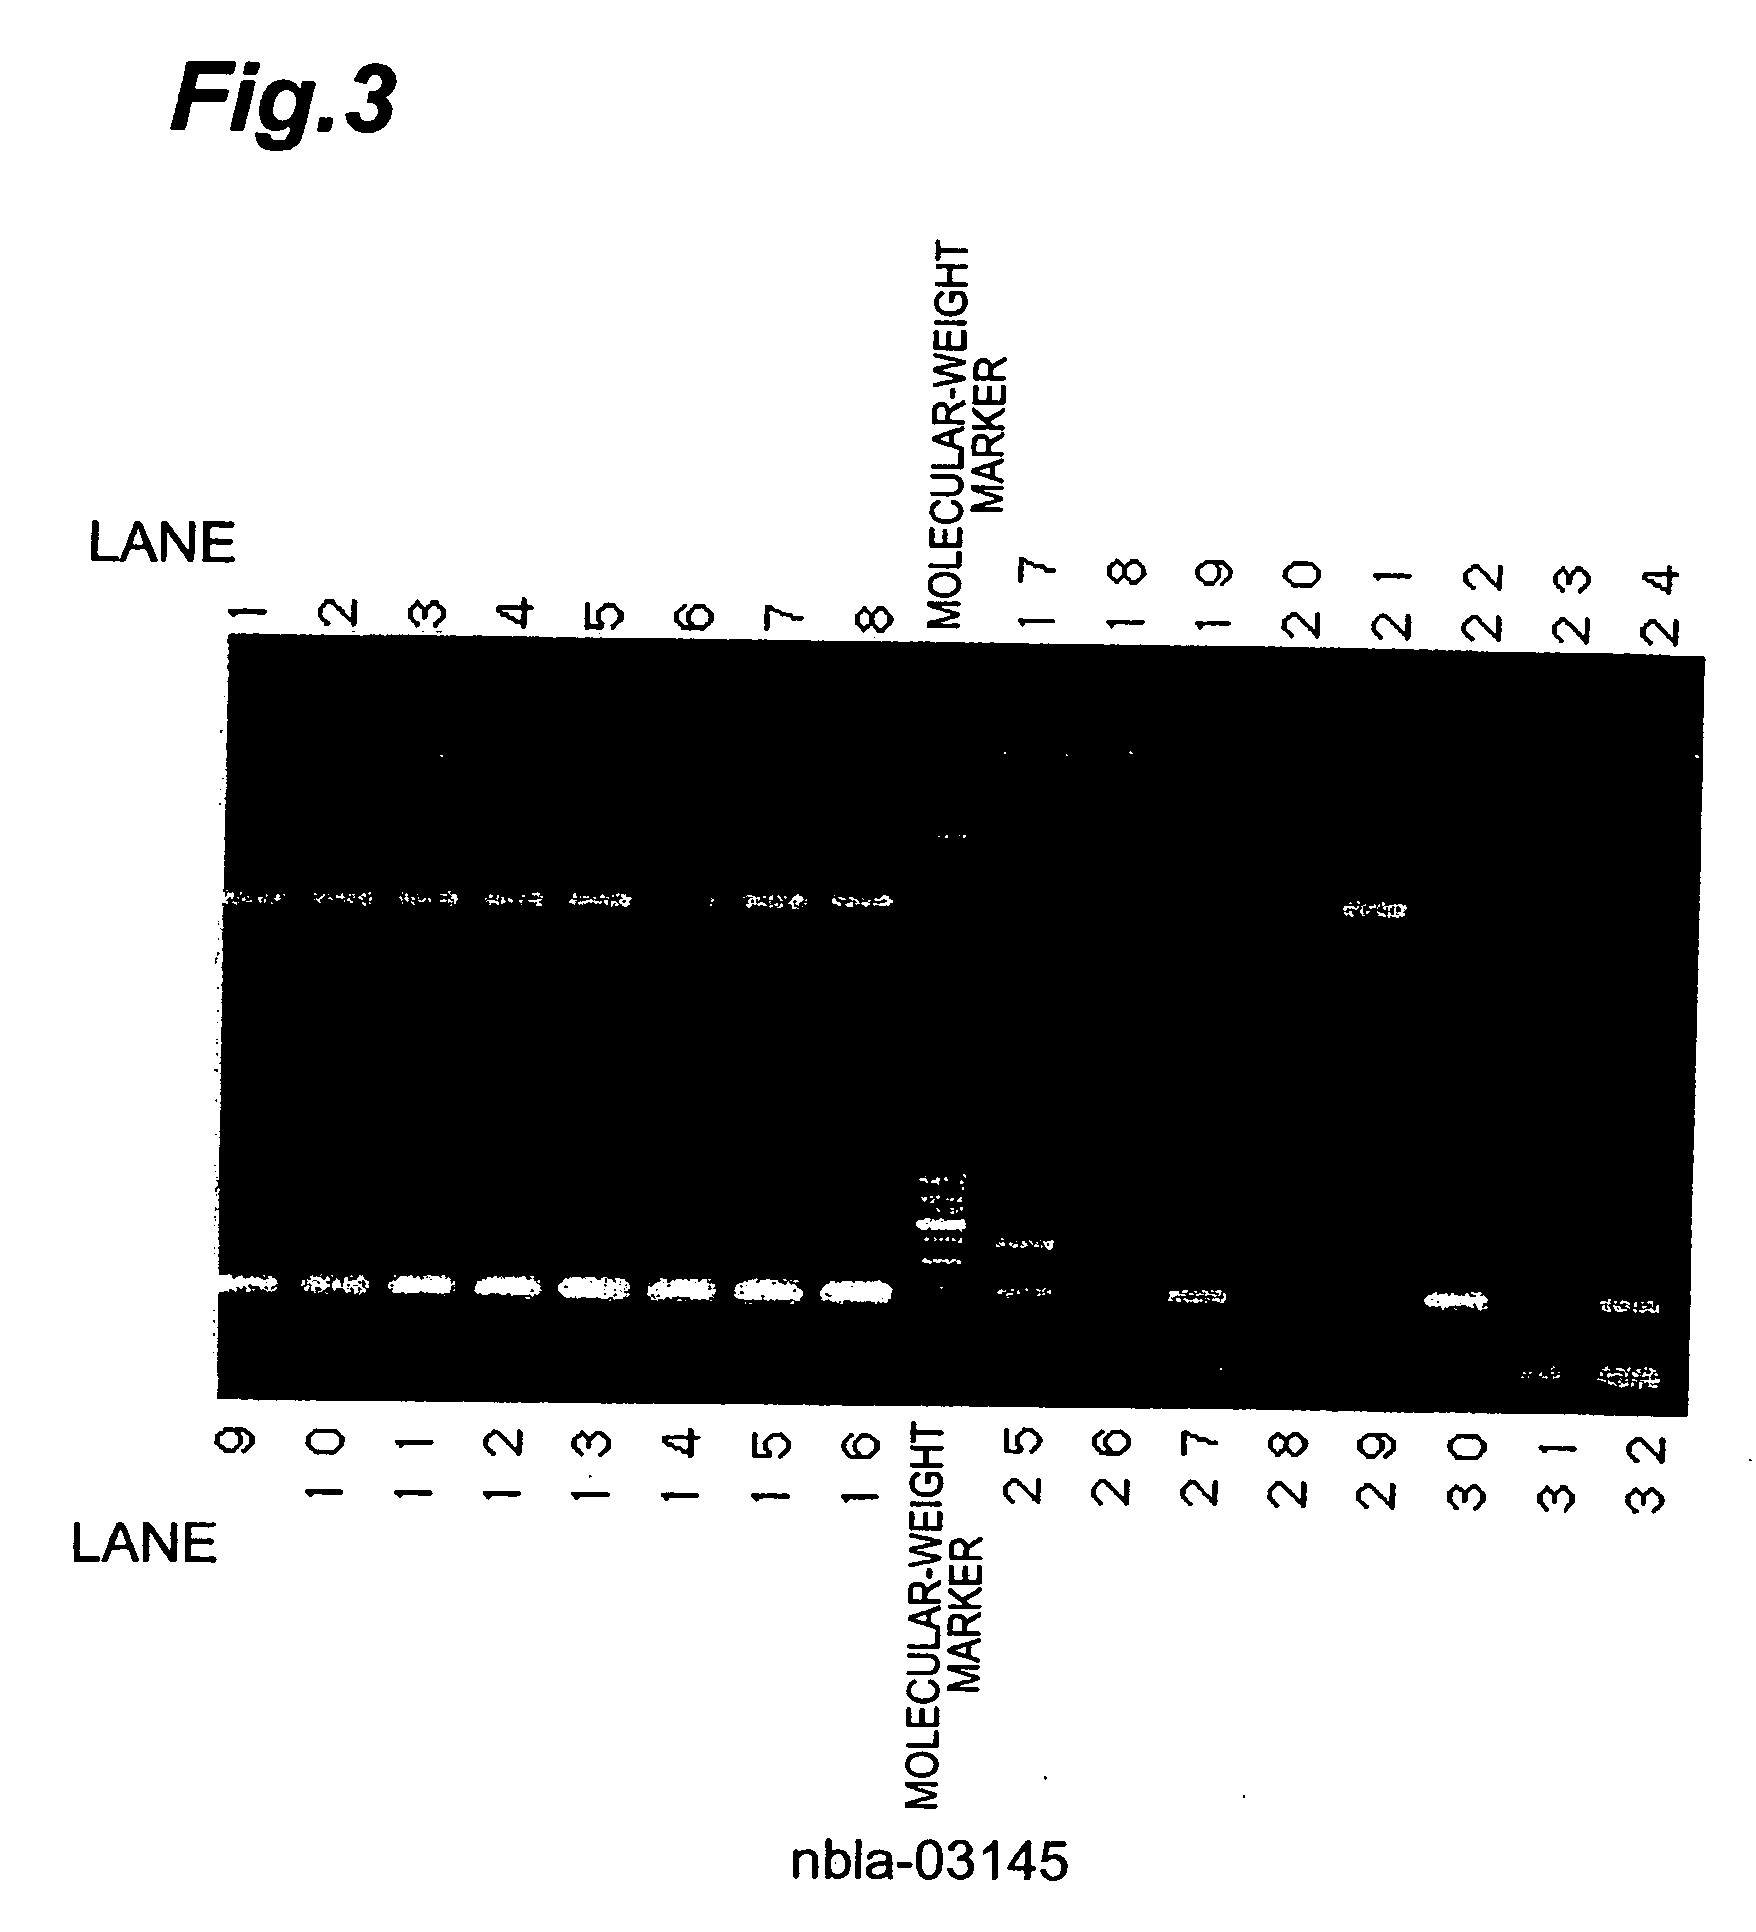 Nucleic acid sequences having characteristics of enhanced expression in human neuroblastoma with favorable prognosis based on comparison between human neuroblastoma with favorable prognosis and human neuroblastoma with unfavorable prognosis